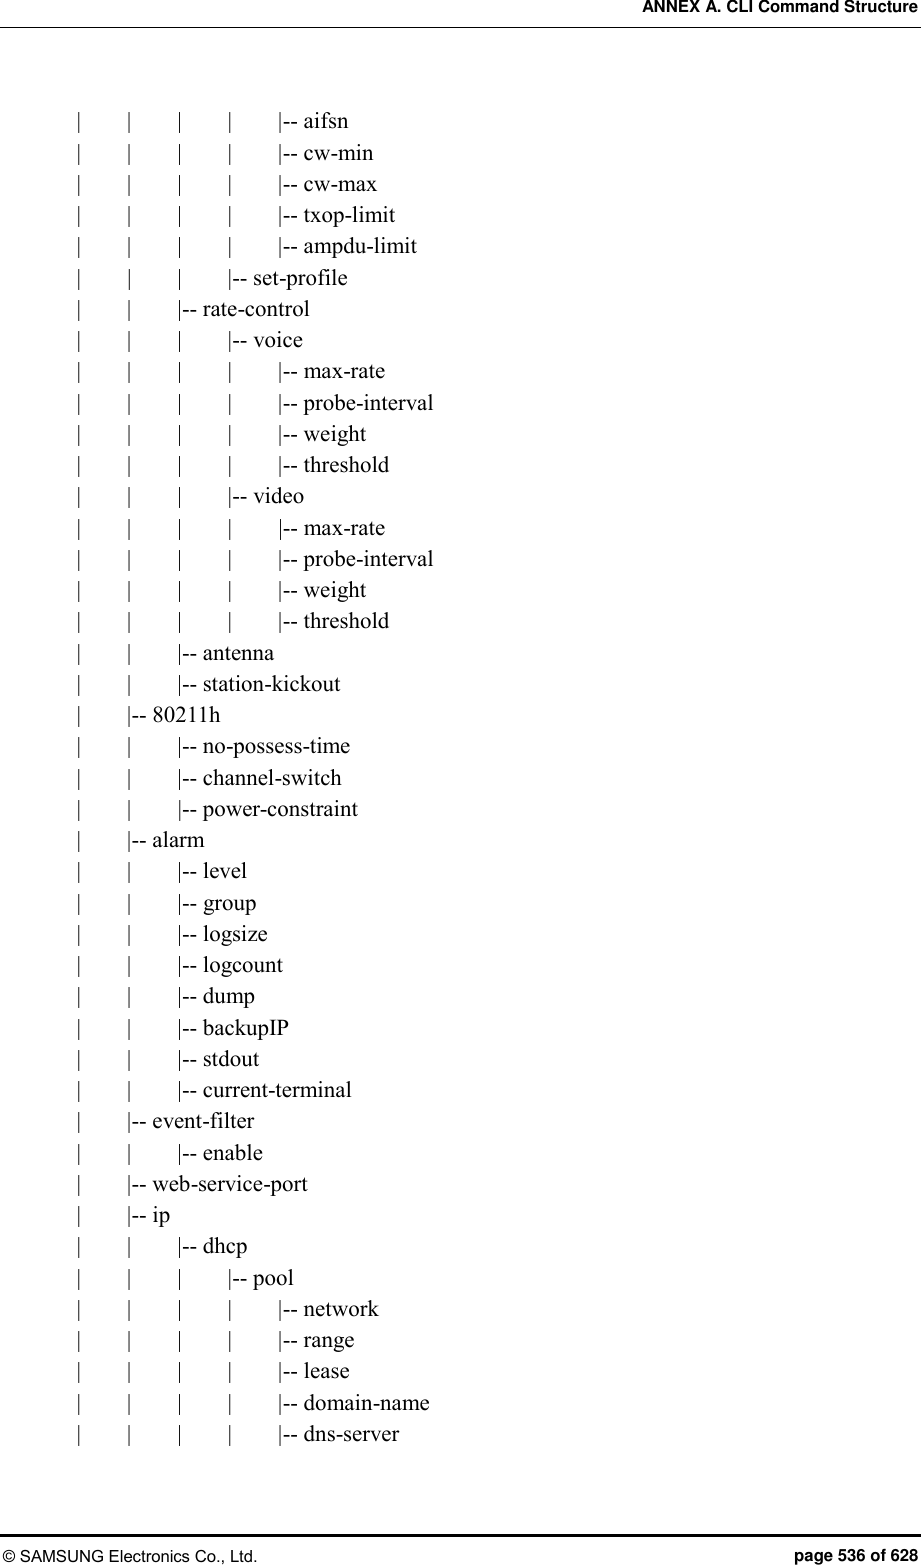 ANNEX A. CLI Command Structure © SAMSUNG Electronics Co., Ltd.  page 536 of 628 |        |        |        |        |-- aifsn |        |        |        |        |-- cw-min |        |        |        |        |-- cw-max |        |        |        |        |-- txop-limit |        |        |        |        |-- ampdu-limit |        |        |        |-- set-profile |        |        |-- rate-control |        |        |        |-- voice |        |        |        |        |-- max-rate |        |        |        |        |-- probe-interval |        |        |        |        |-- weight |        |        |        |        |-- threshold |        |        |        |-- video |        |        |        |    |-- max-rate |        |        |        |        |-- probe-interval |        |        |        |        |-- weight |        |        |        |        |-- threshold |        |        |-- antenna |        |        |-- station-kickout |        |-- 80211h |        |        |-- no-possess-time |        |        |-- channel-switch |        |      |-- power-constraint |        |-- alarm |        |        |-- level |        |        |-- group |        |        |-- logsize |        |        |-- logcount |        |        |-- dump |        |        |-- backupIP |        |        |-- stdout |        |        |-- current-terminal |        |-- event-filter |        |        |-- enable |        |-- web-service-port |        |-- ip |        |        |-- dhcp |        |        |        |-- pool |        |        |        |        |-- network |        |        |        |        |-- range |        |        |        |        |-- lease |        |        |        |        |-- domain-name |        |        |        |        |-- dns-server 